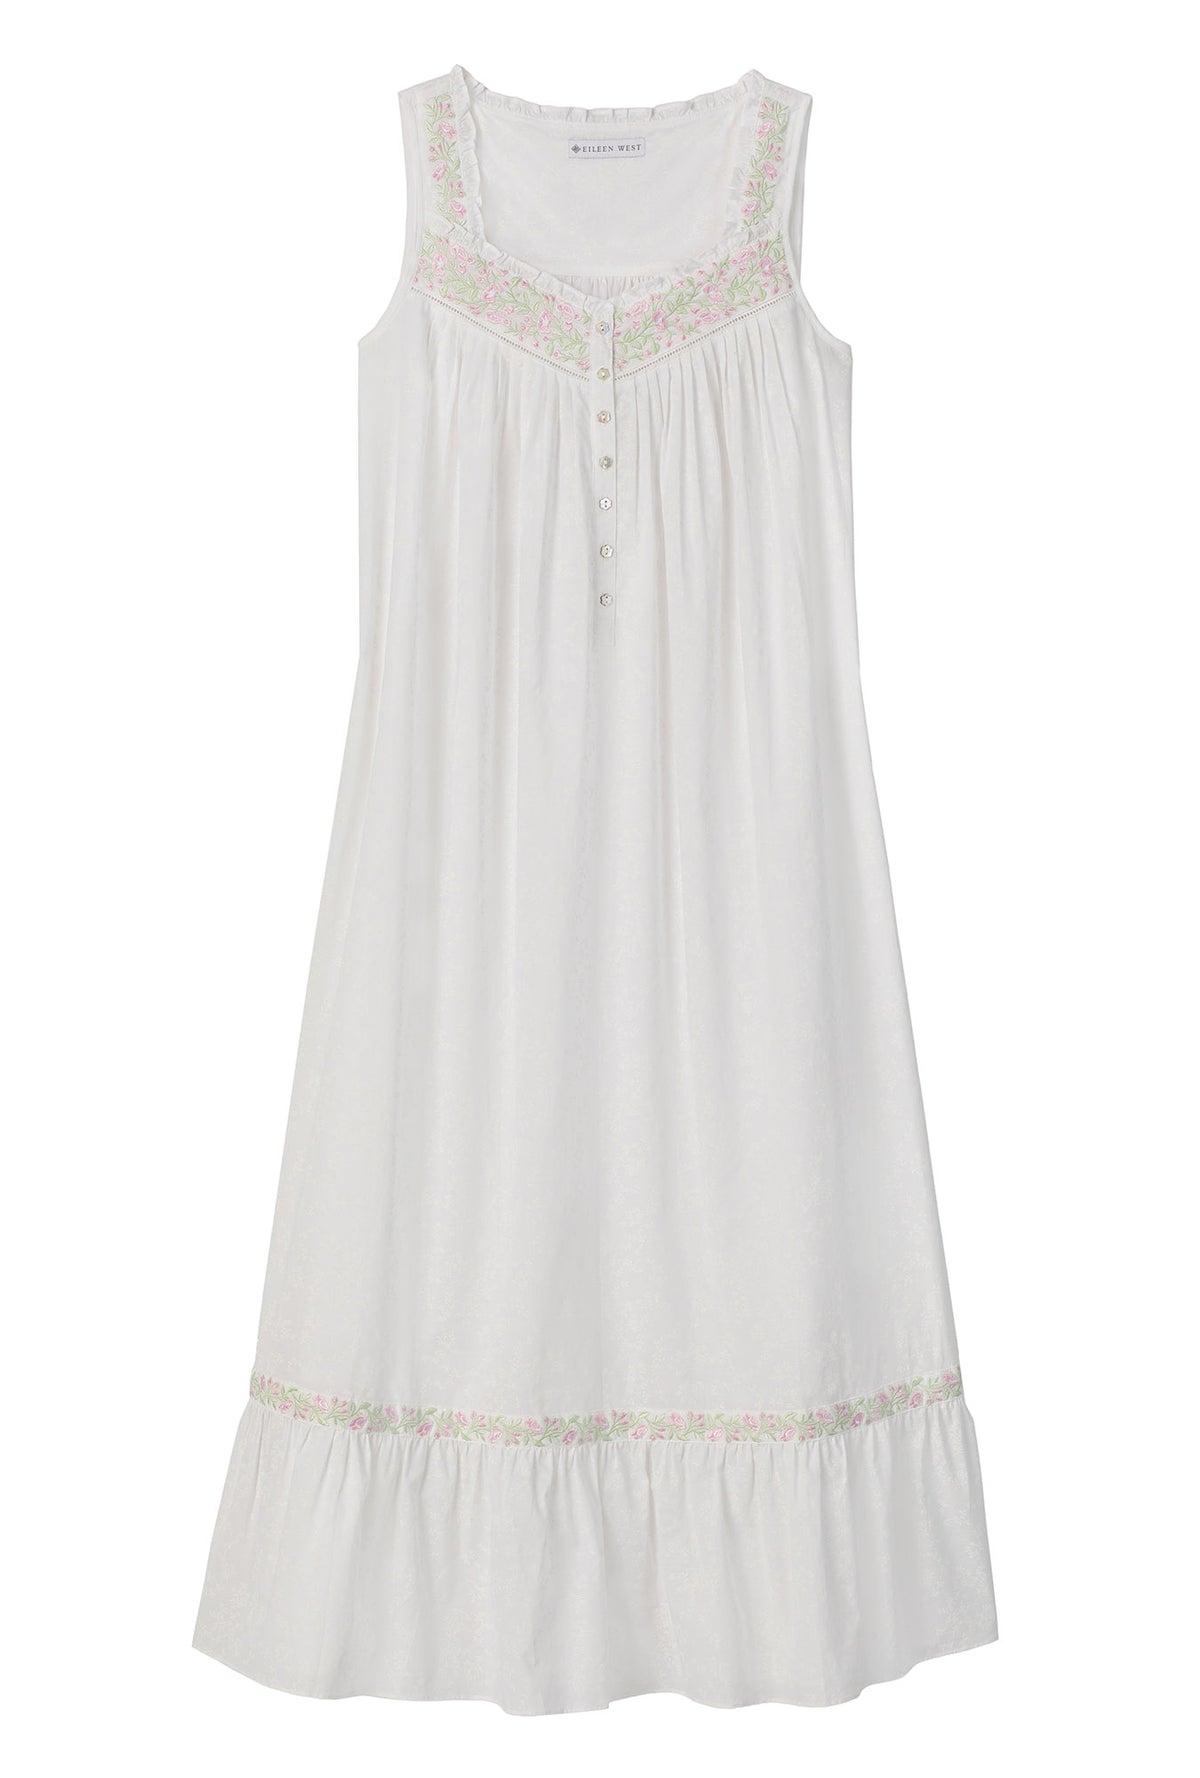 White sleeveless eileen cotton nightgown with garden rose embroidered pattern.